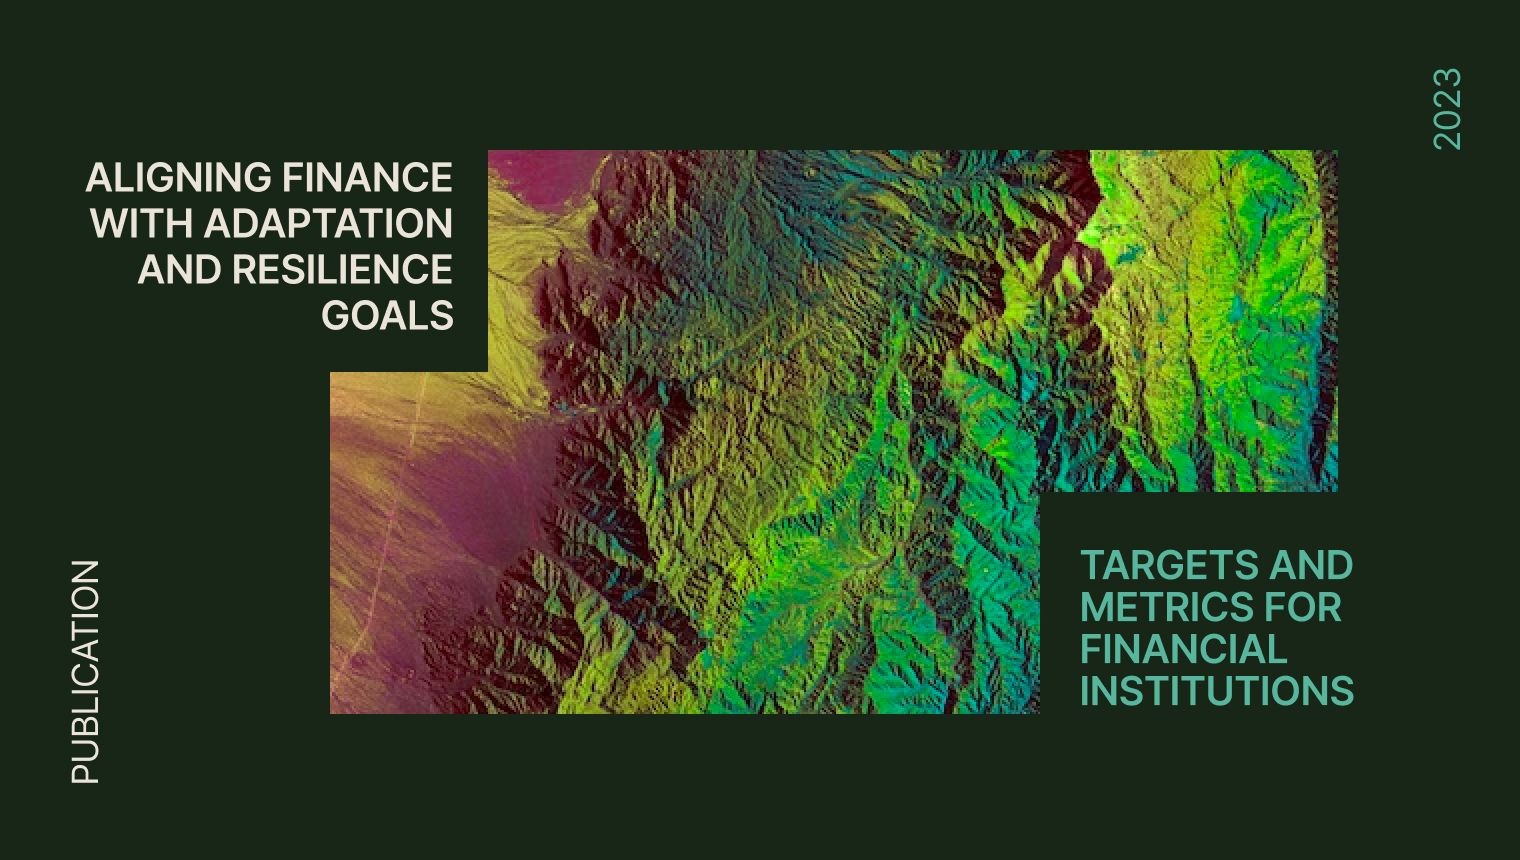 Aligning Finance with Adaptation and Resilience Goals